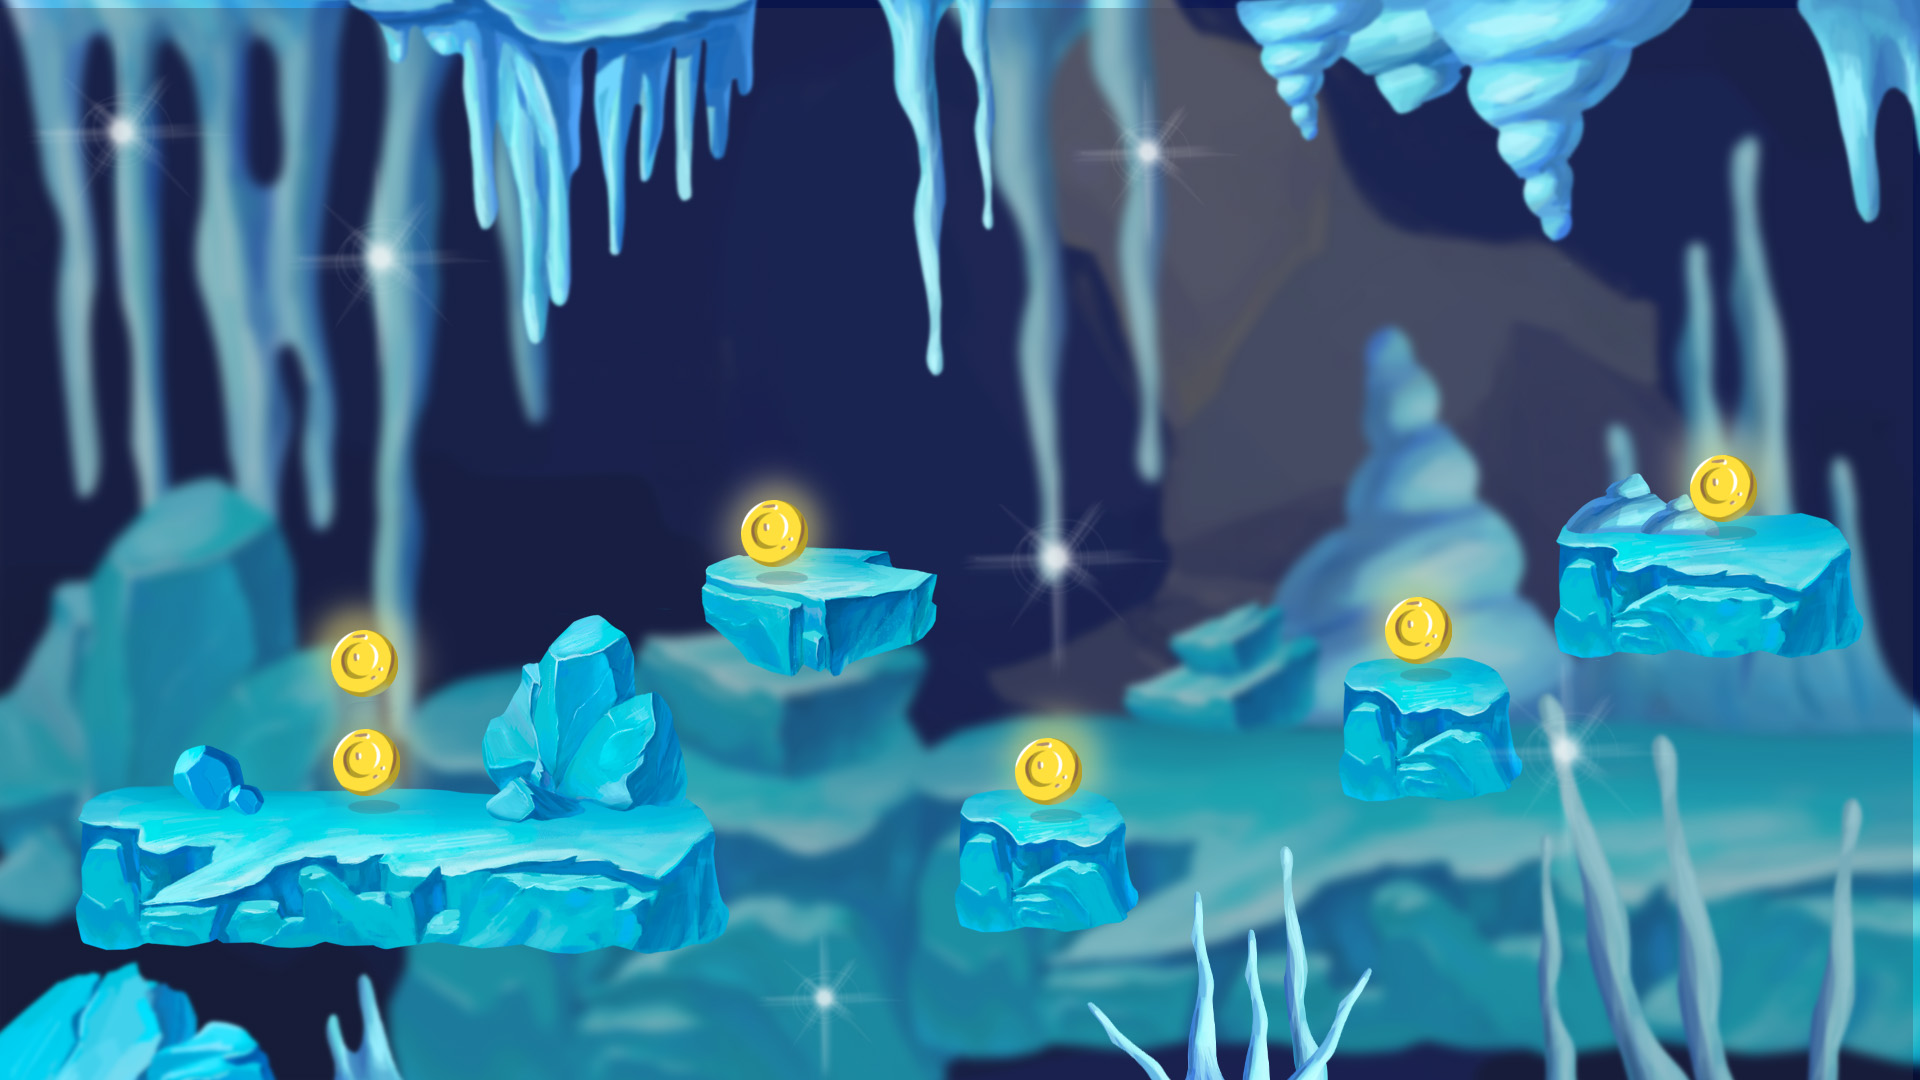 2D Asset Pack FREE - Ice Cave